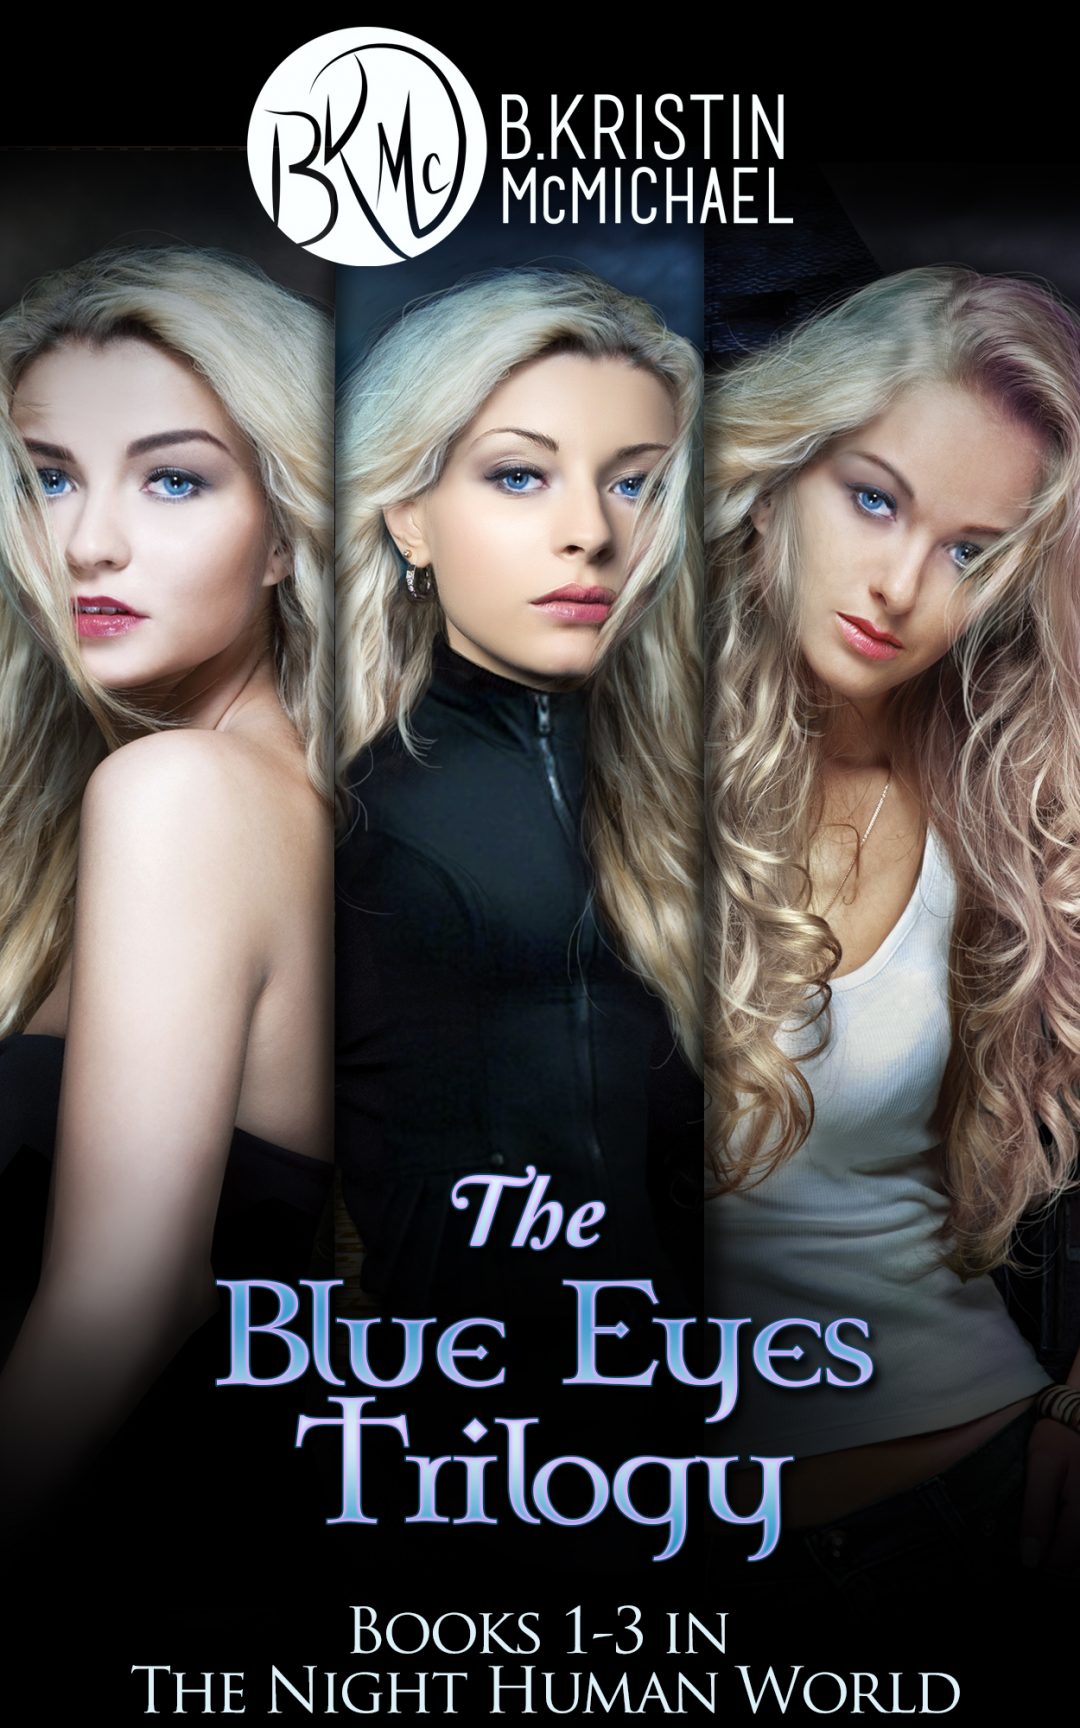 The Legend of the Blue Eyes by B. Kristin McMichael